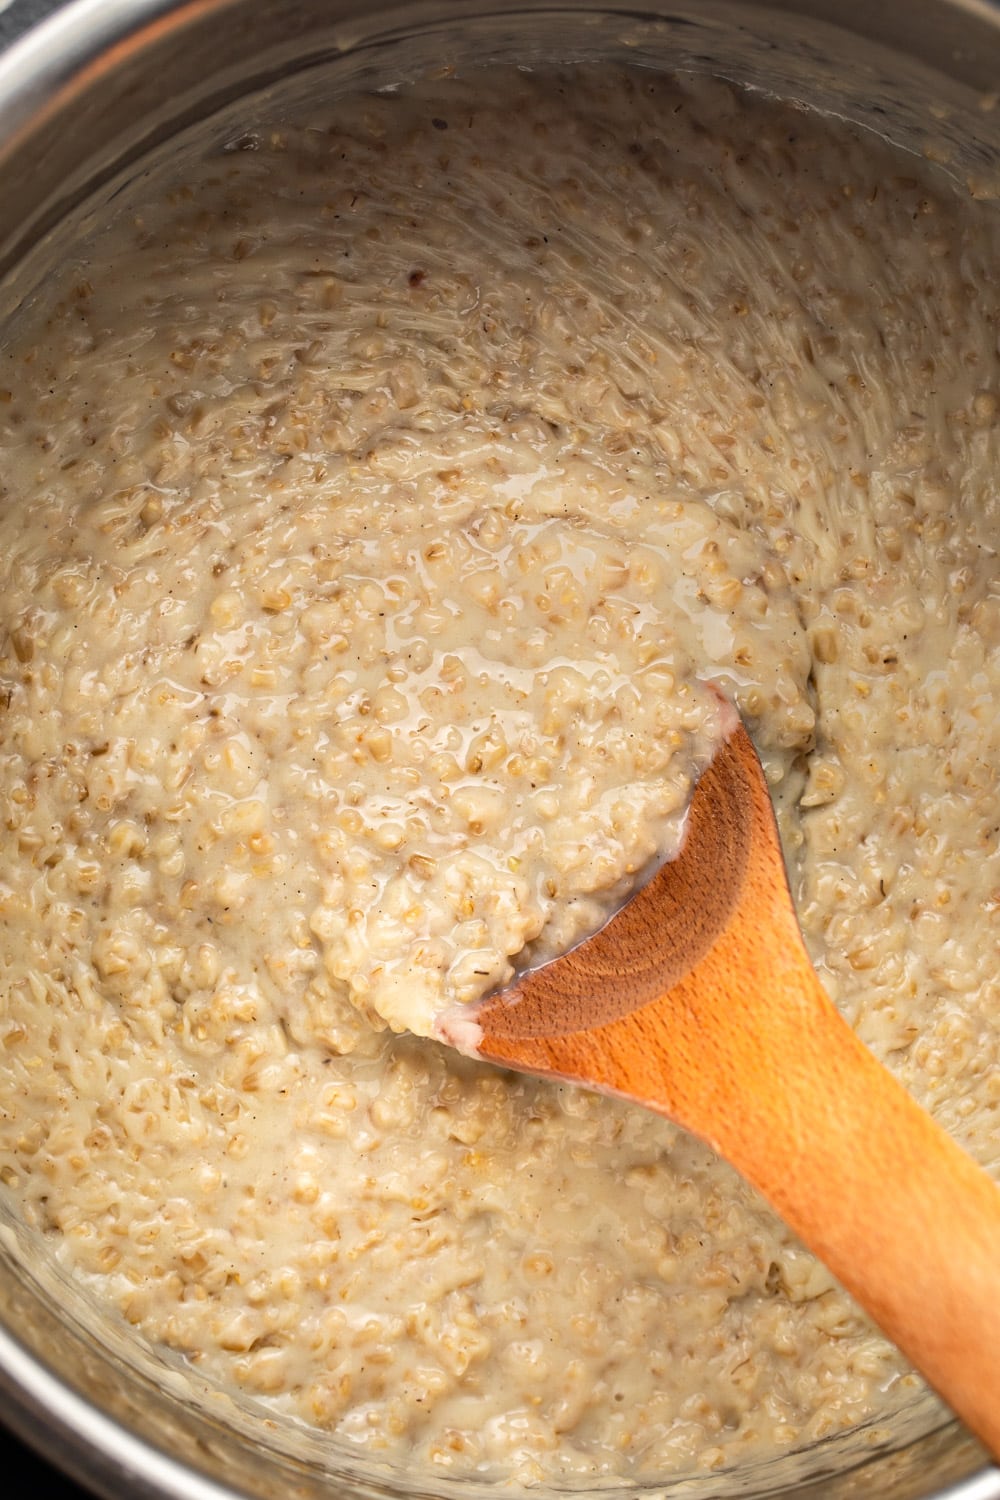 Rolled, Quick-Cook, and Steel Cut Oats—Plus How to Cook Them